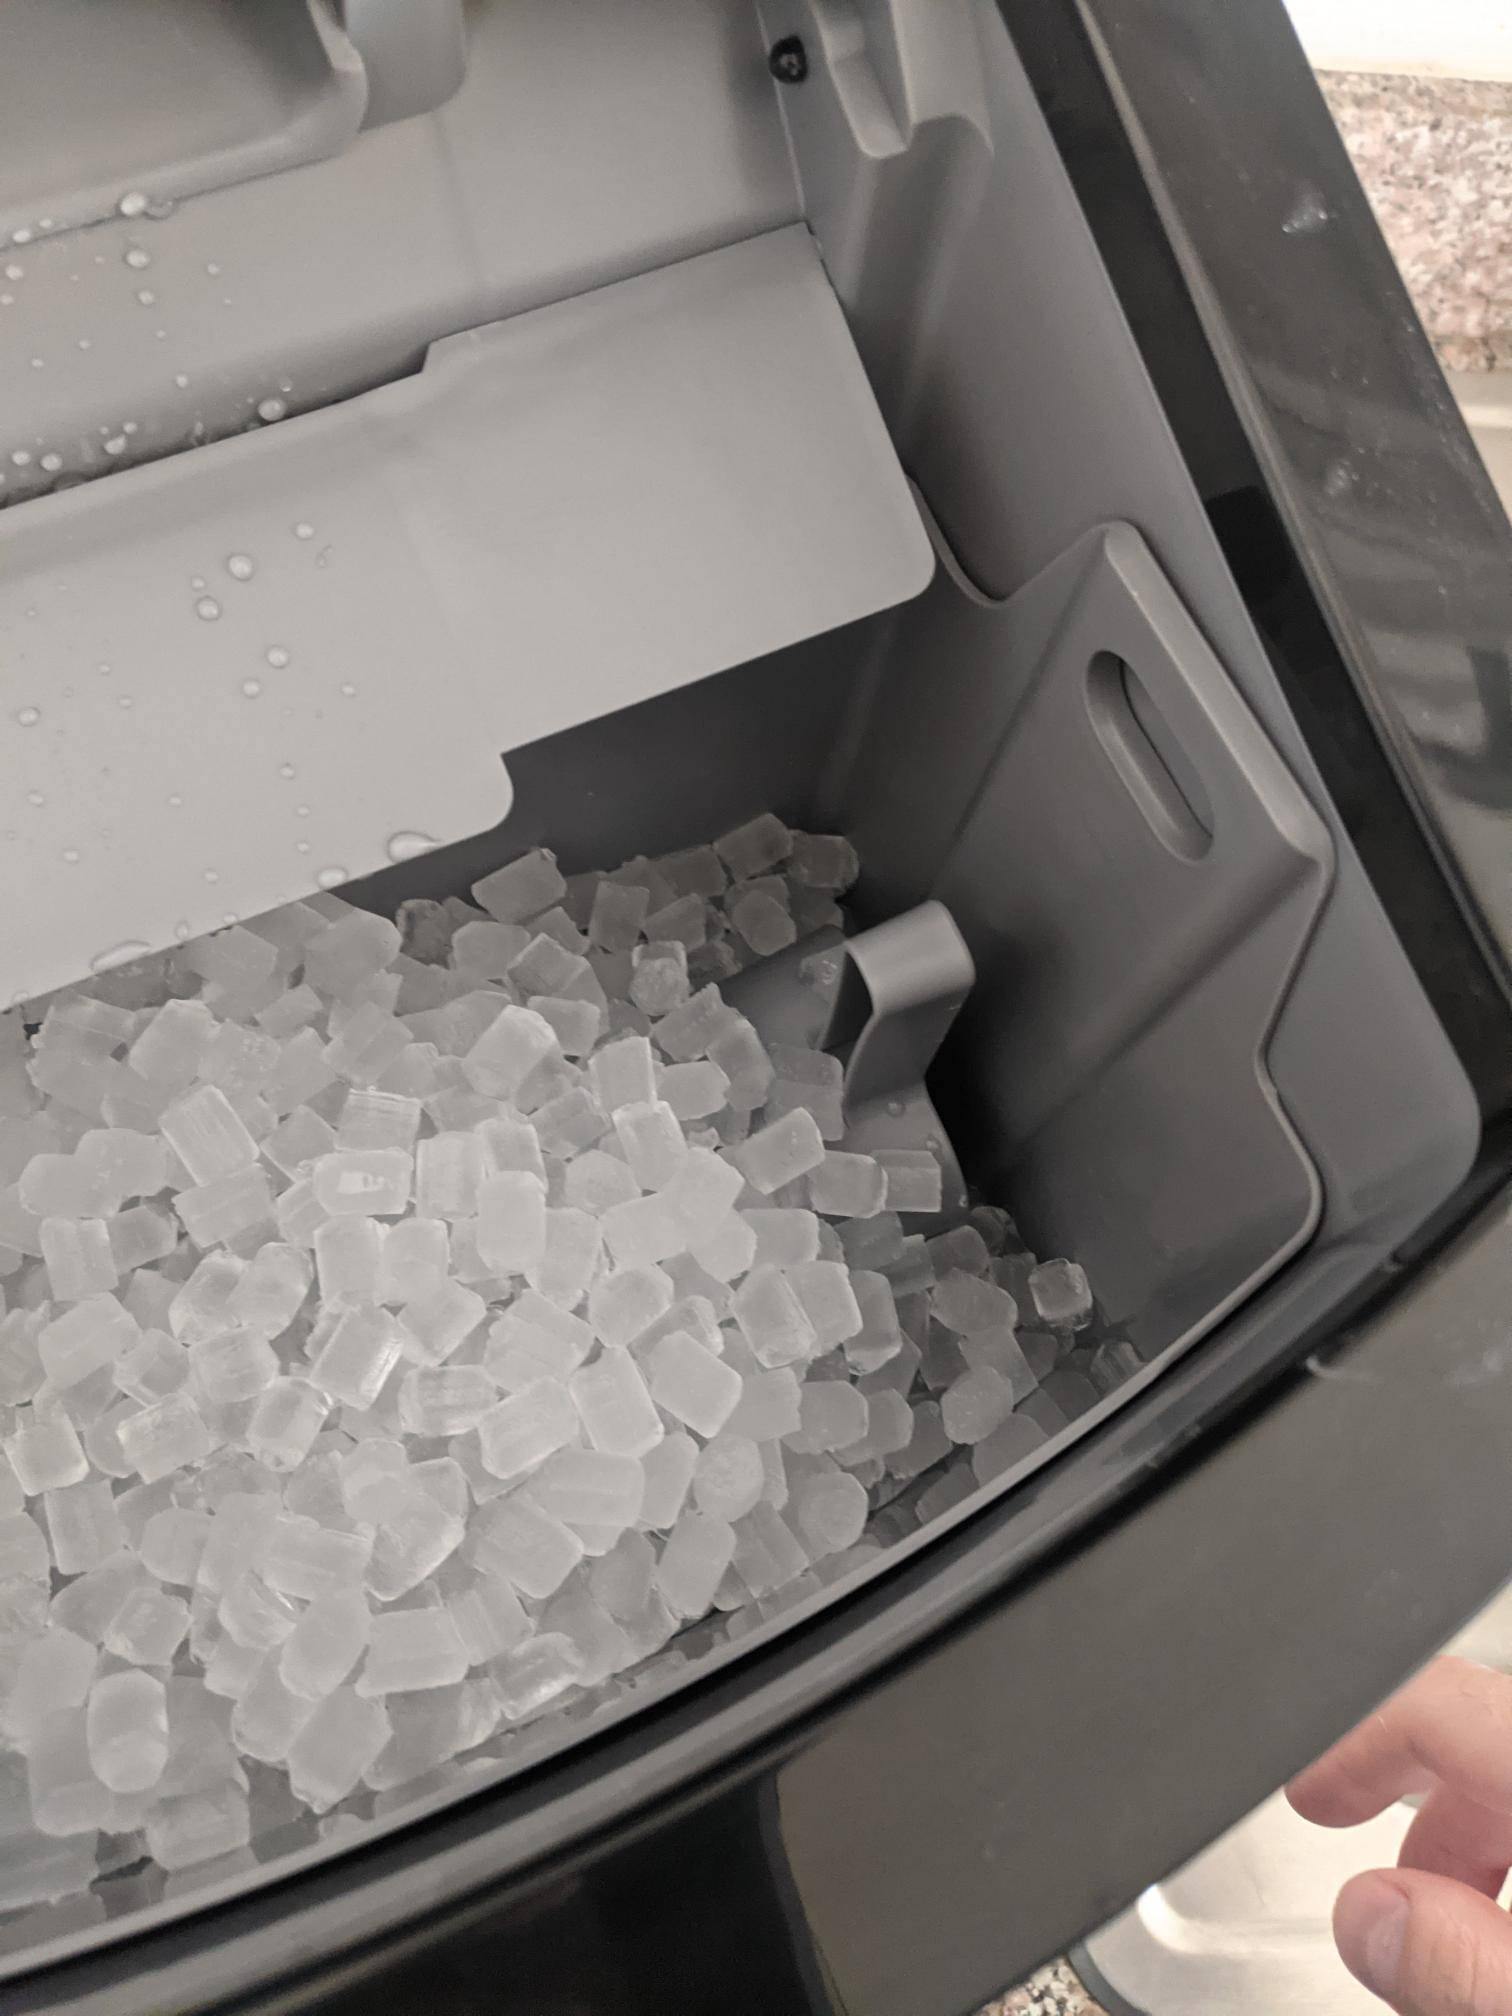 The NewAir Nugget Ice Maker:    The “Good Ice” Has Never Tasted So Good